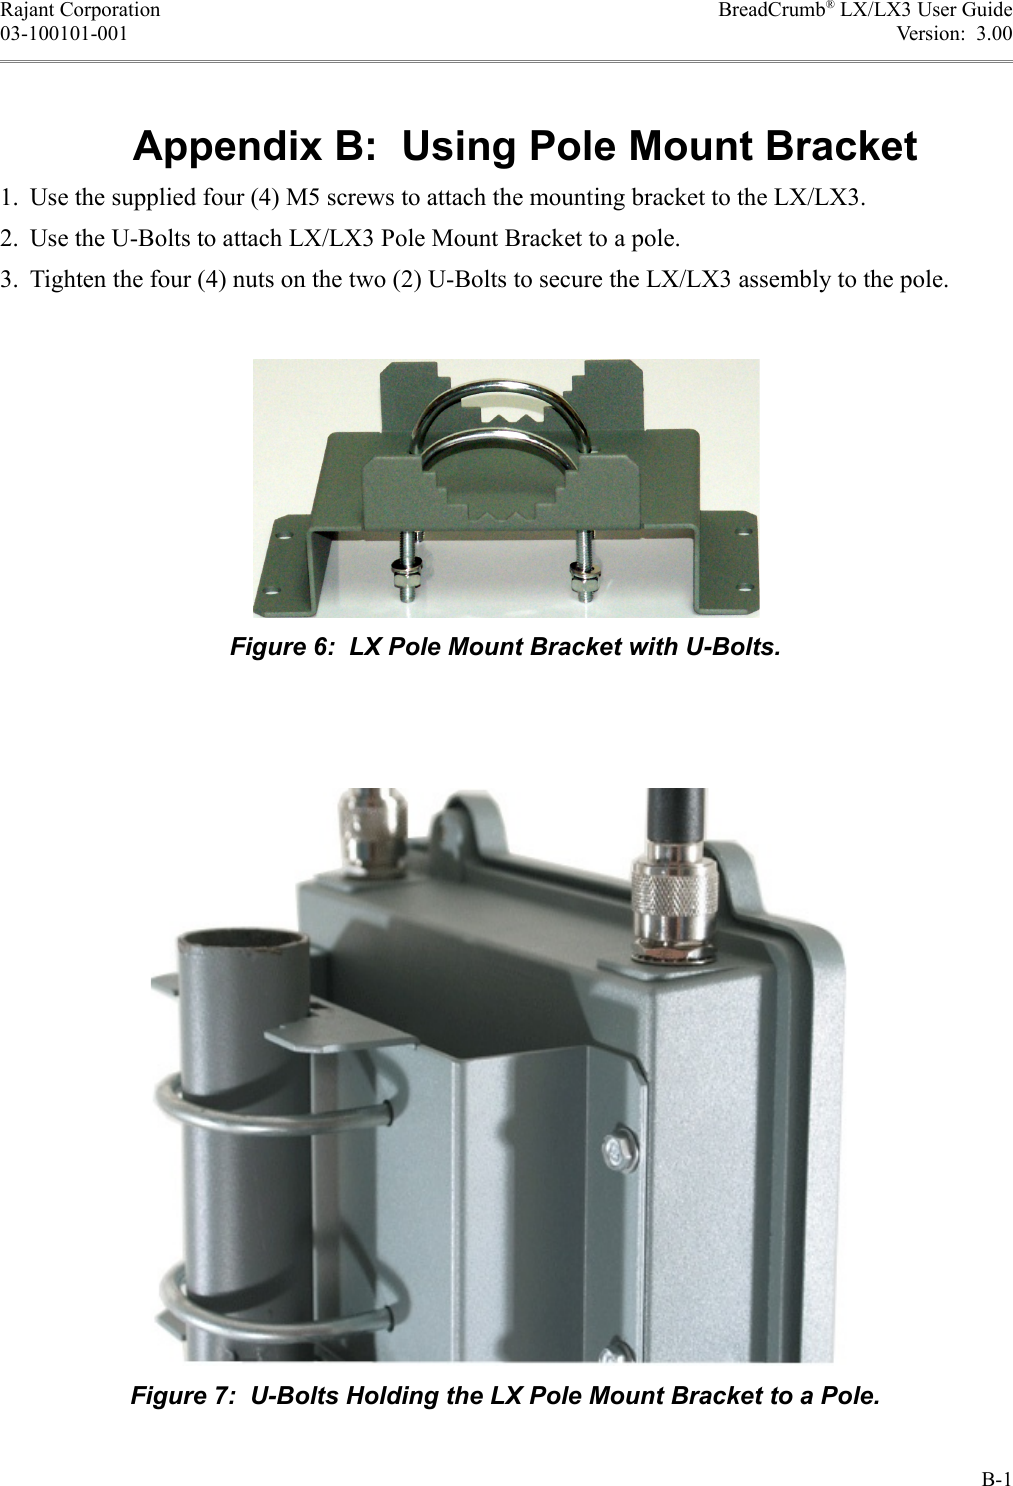 Rajant Corporation BreadCrumb® LX/LX3 User Guide03-100101-001 Version:  3.00Appendix B:  Using Pole Mount Bracket1. Use the supplied four (4) M5 screws to attach the mounting bracket to the LX/LX3.2. Use the U-Bolts to attach LX/LX3 Pole Mount Bracket to a pole.3. Tighten the four (4) nuts on the two (2) U-Bolts to secure the LX/LX3 assembly to the pole.B-1Figure 7:  U-Bolts Holding the LX Pole Mount Bracket to a Pole.Figure 6:  LX Pole Mount Bracket with U-Bolts.